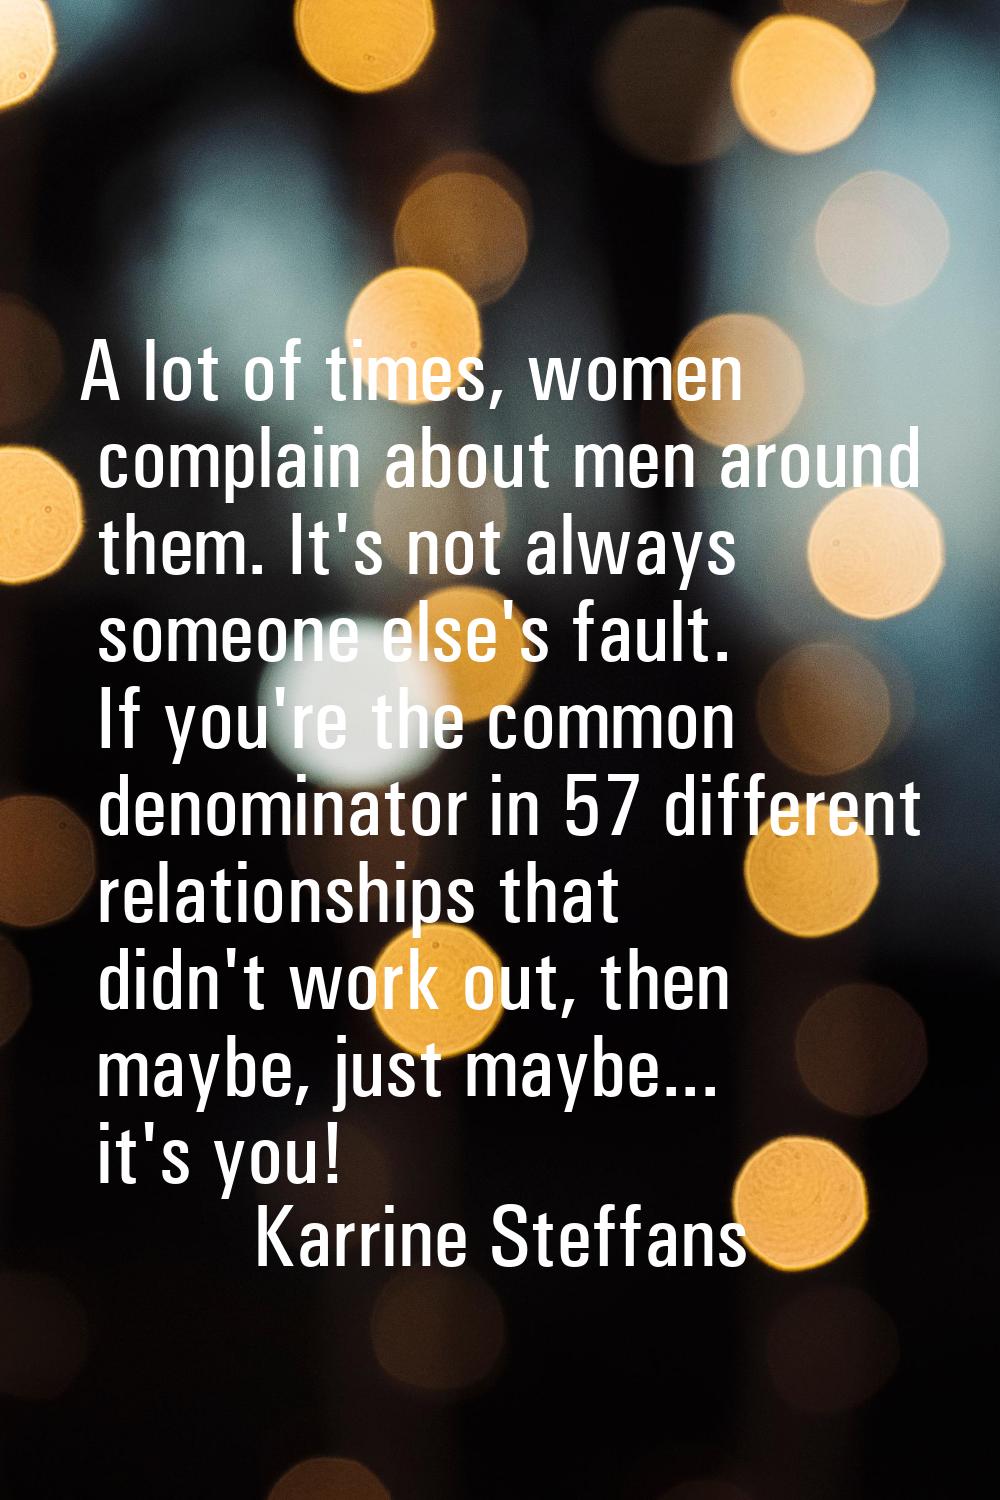 A lot of times, women complain about men around them. It's not always someone else's fault. If you'